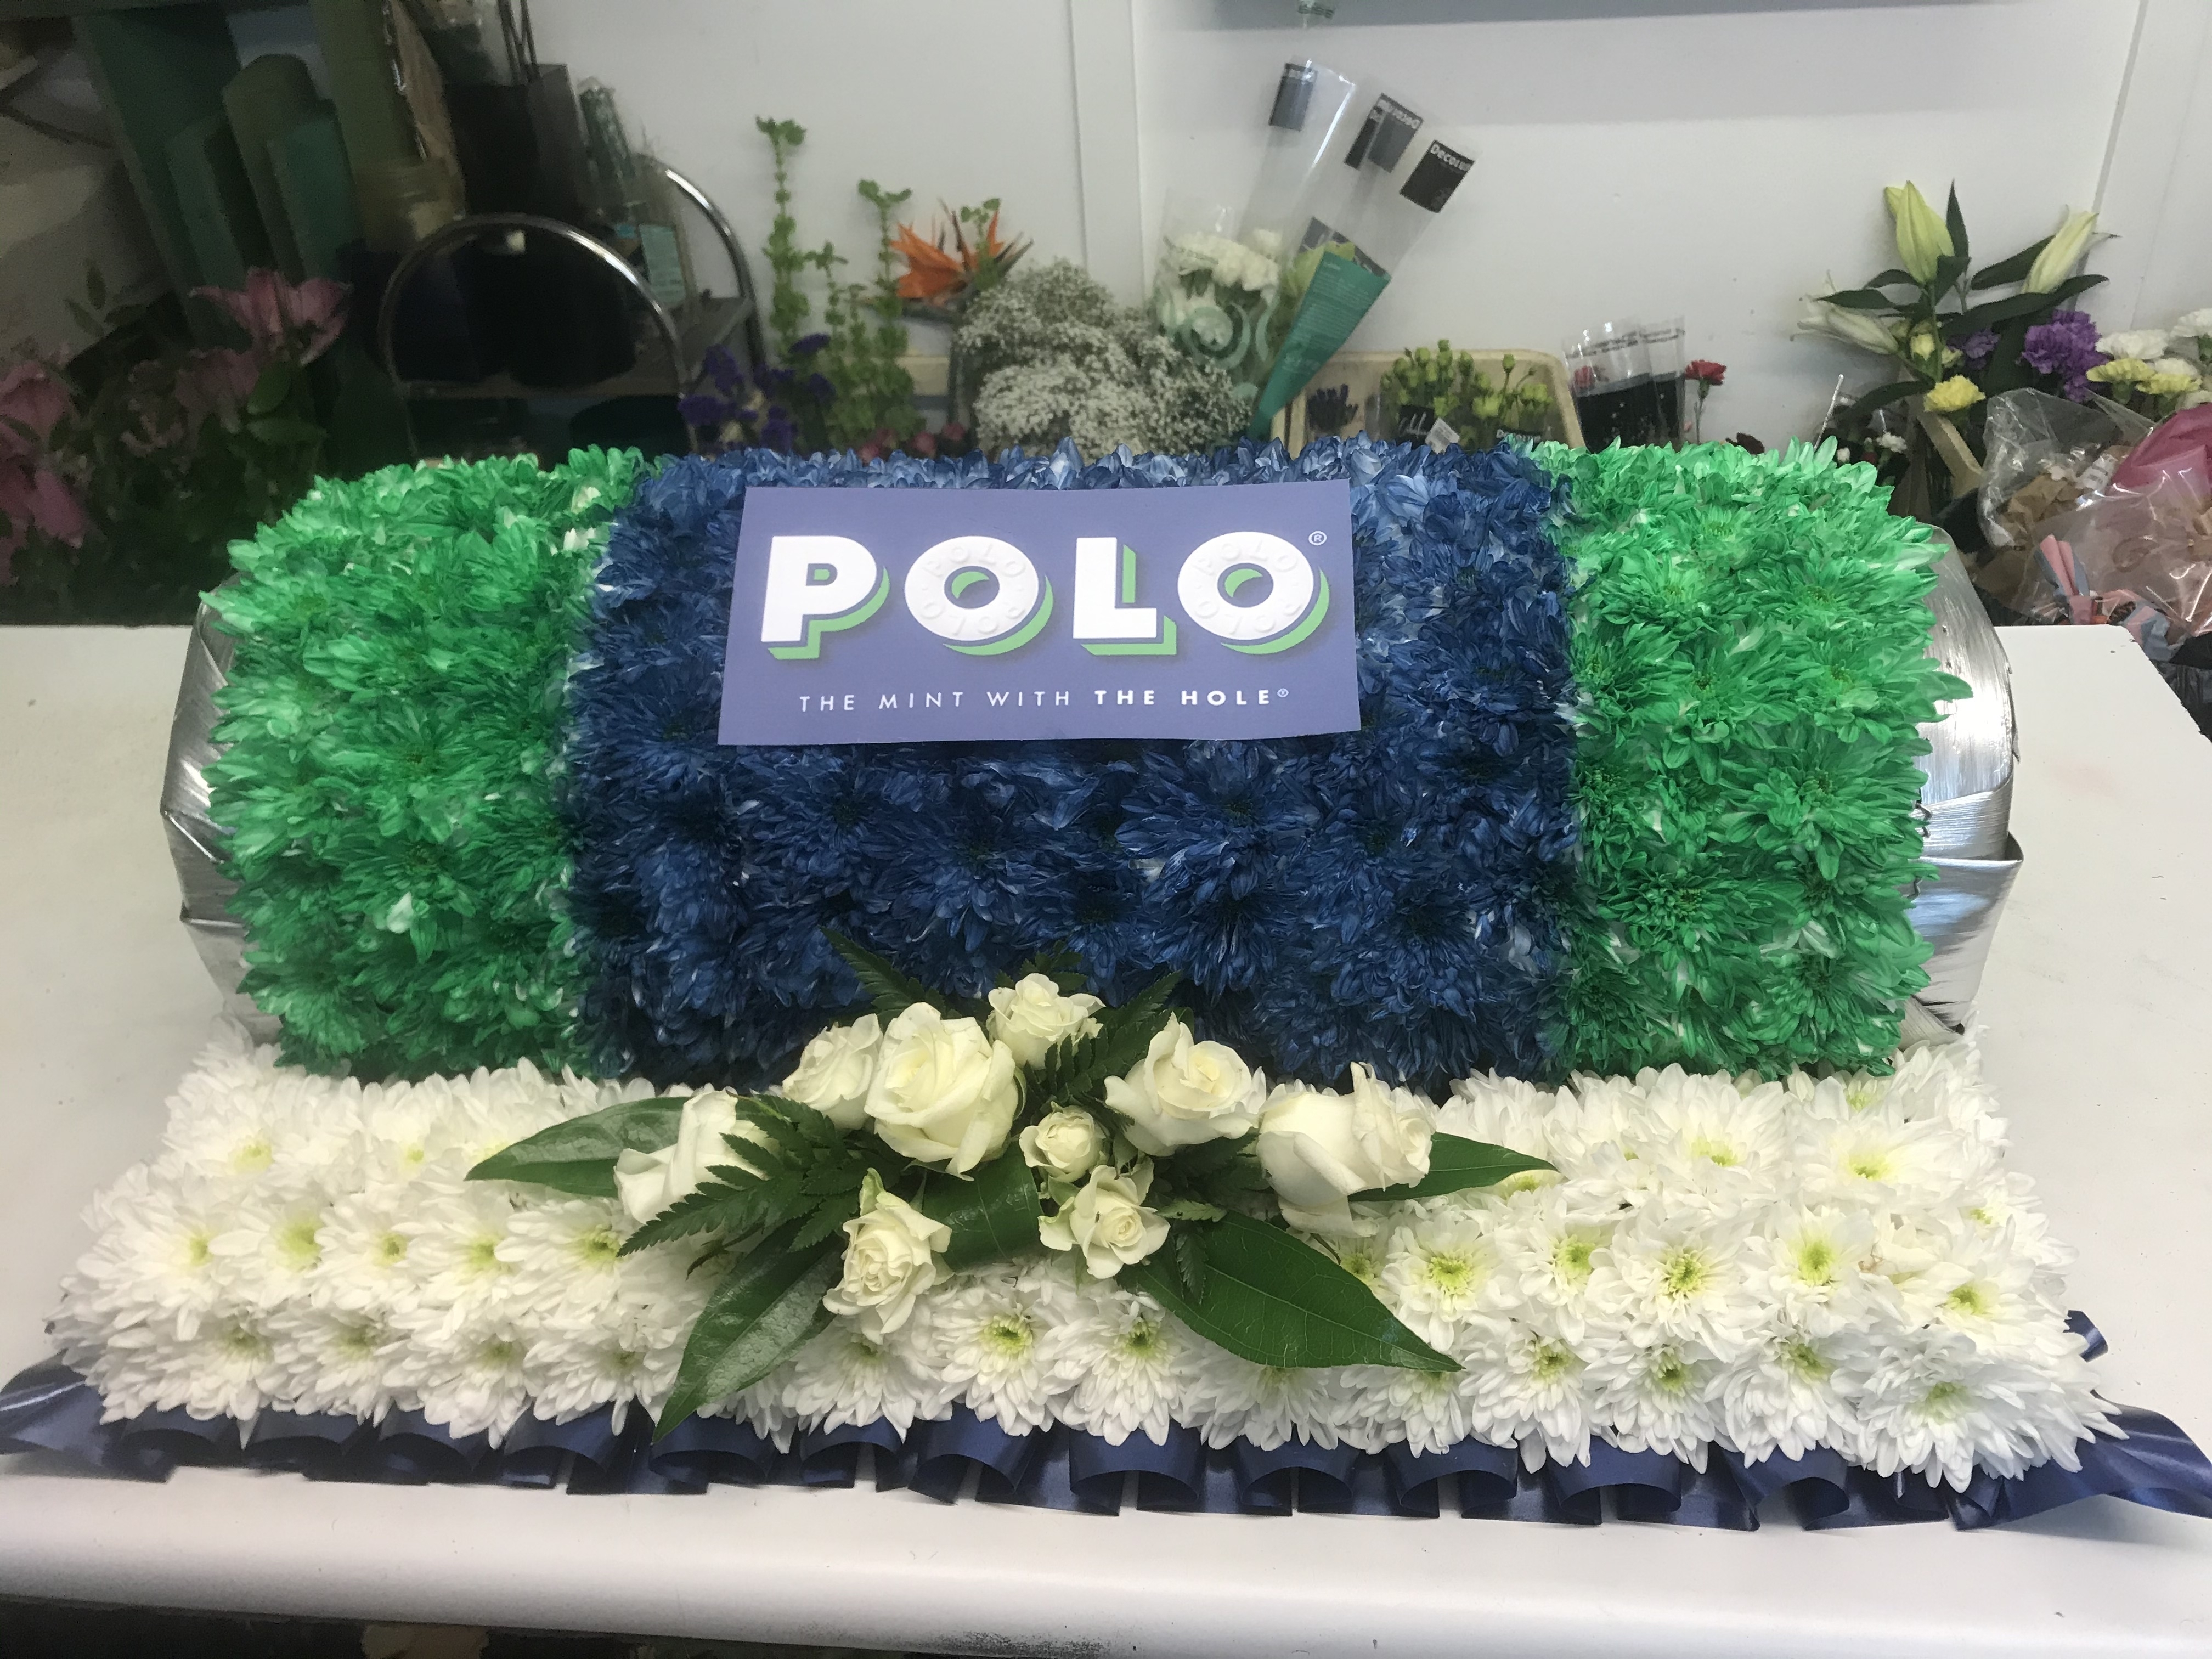 Polo Mints made from flowers